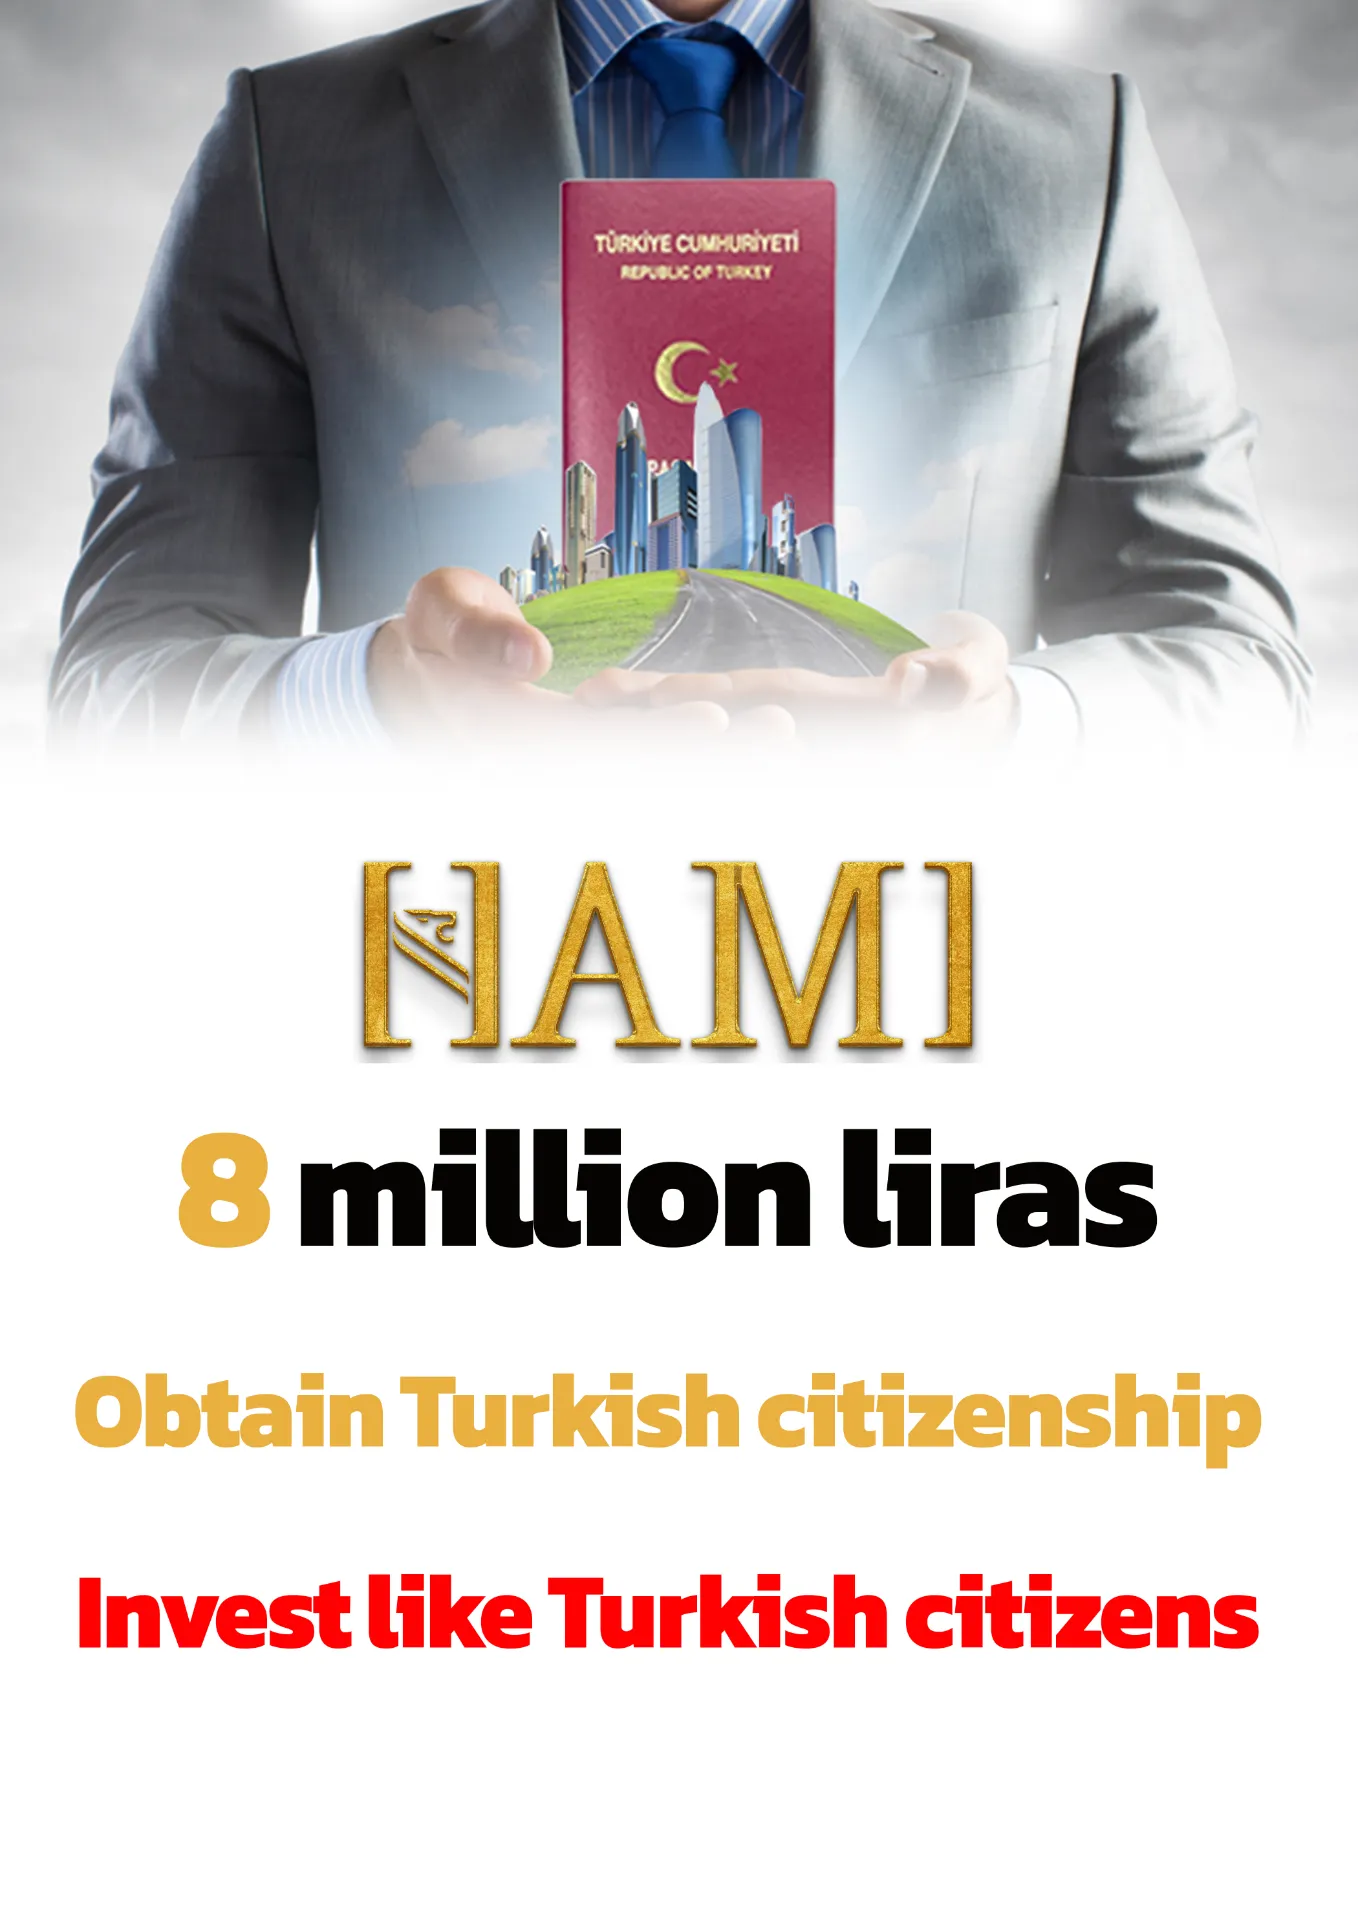 The special offer of the international sponsoring holding for you to obtain Turkish citizenship with 8 million liras